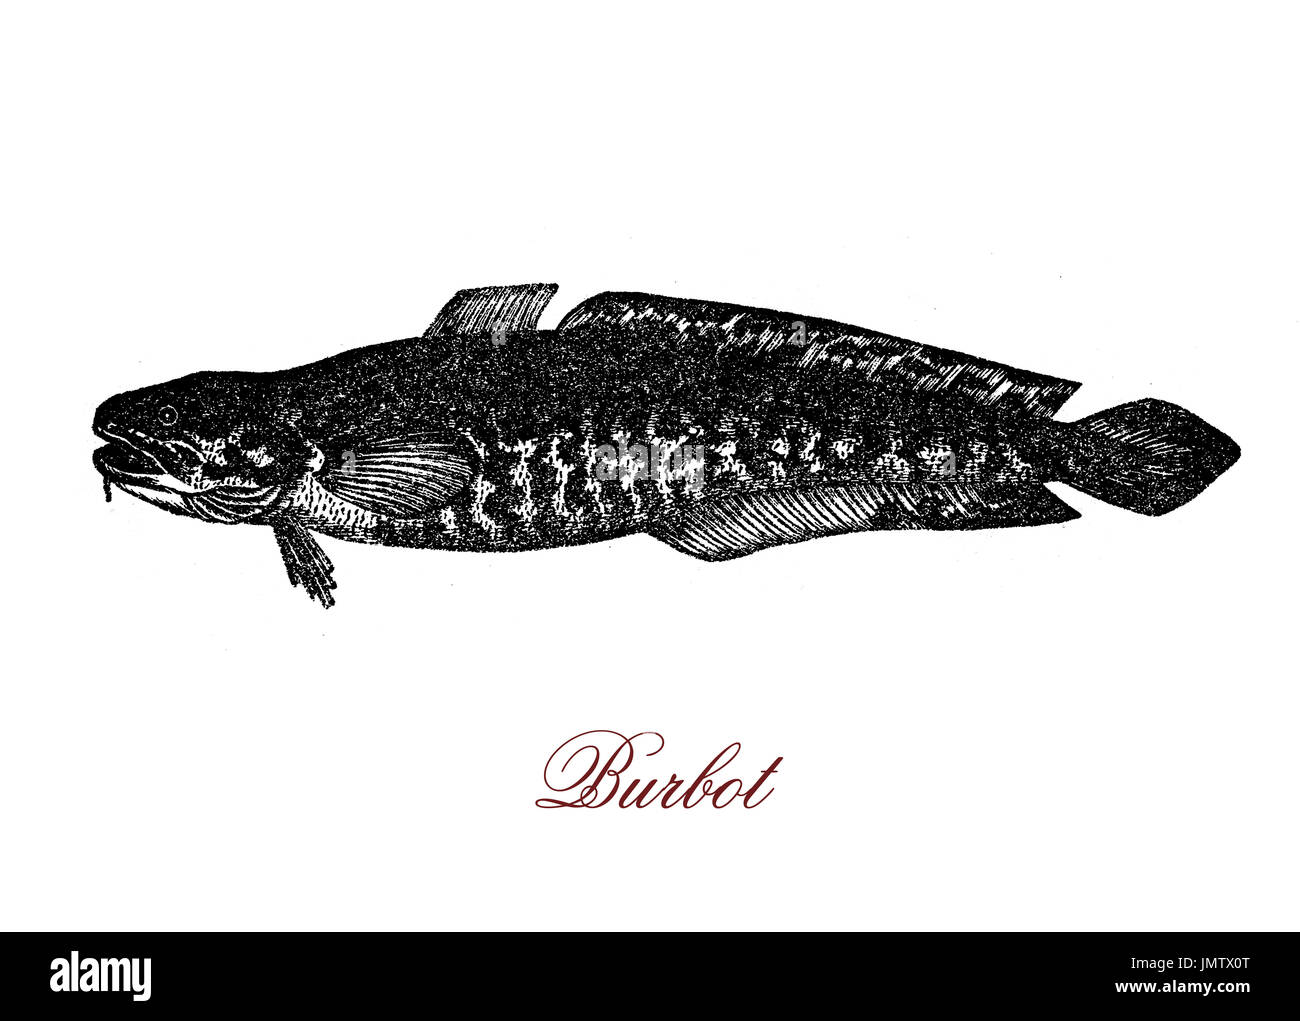 Vintage engraving of burbot, freshware circumpolar fish, it has a serpent-like body and lives and breeds under ice, its name comes fron Latin as beard, for his chin wisker. Stock Photo